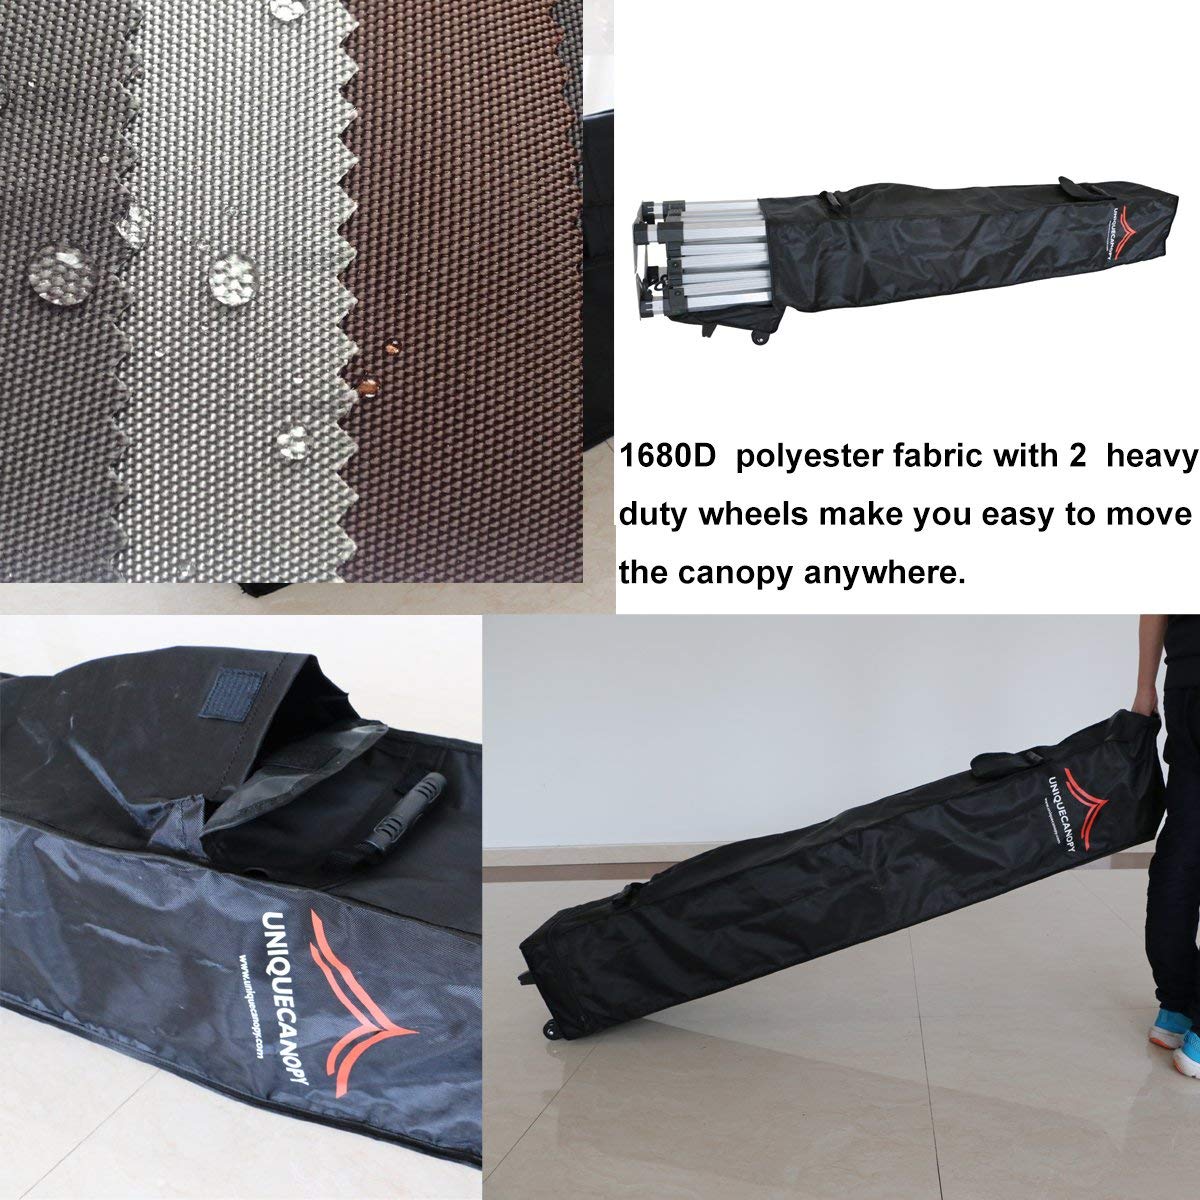 wheeled bag of 10x10 pop up canpy with side